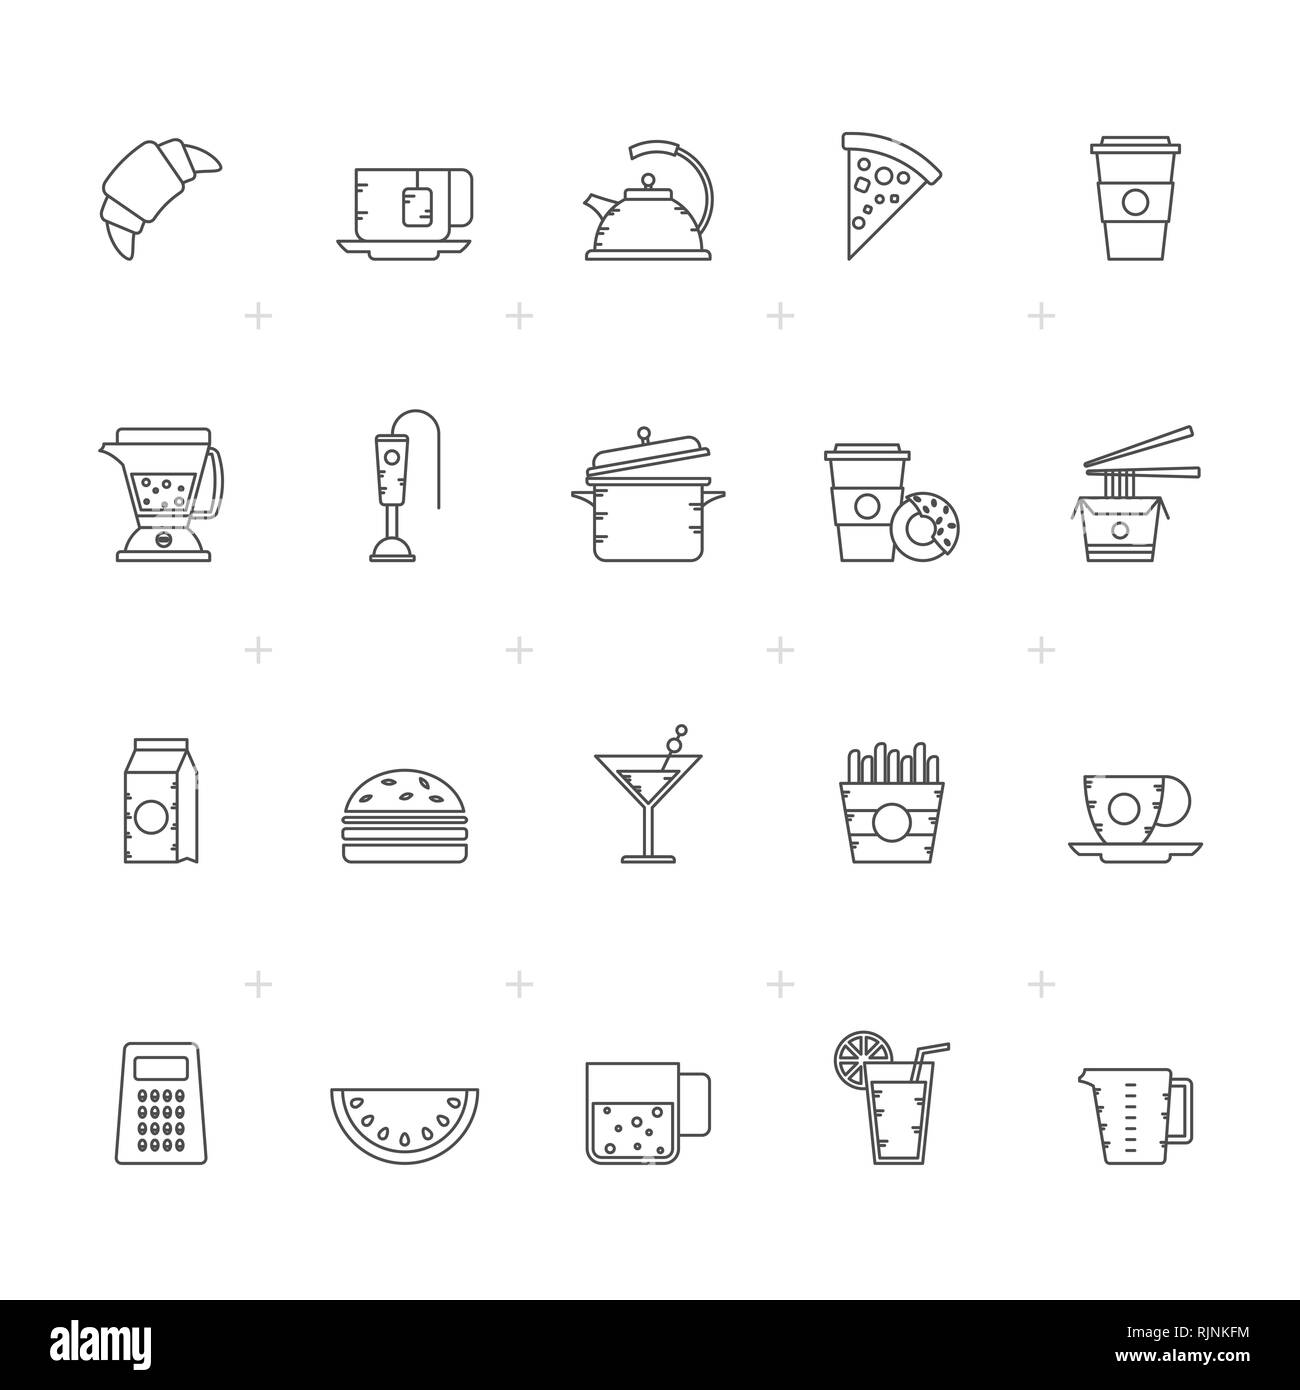 Food, Drink and kitchen equipment icons 2 - vector icon set Stock Vector